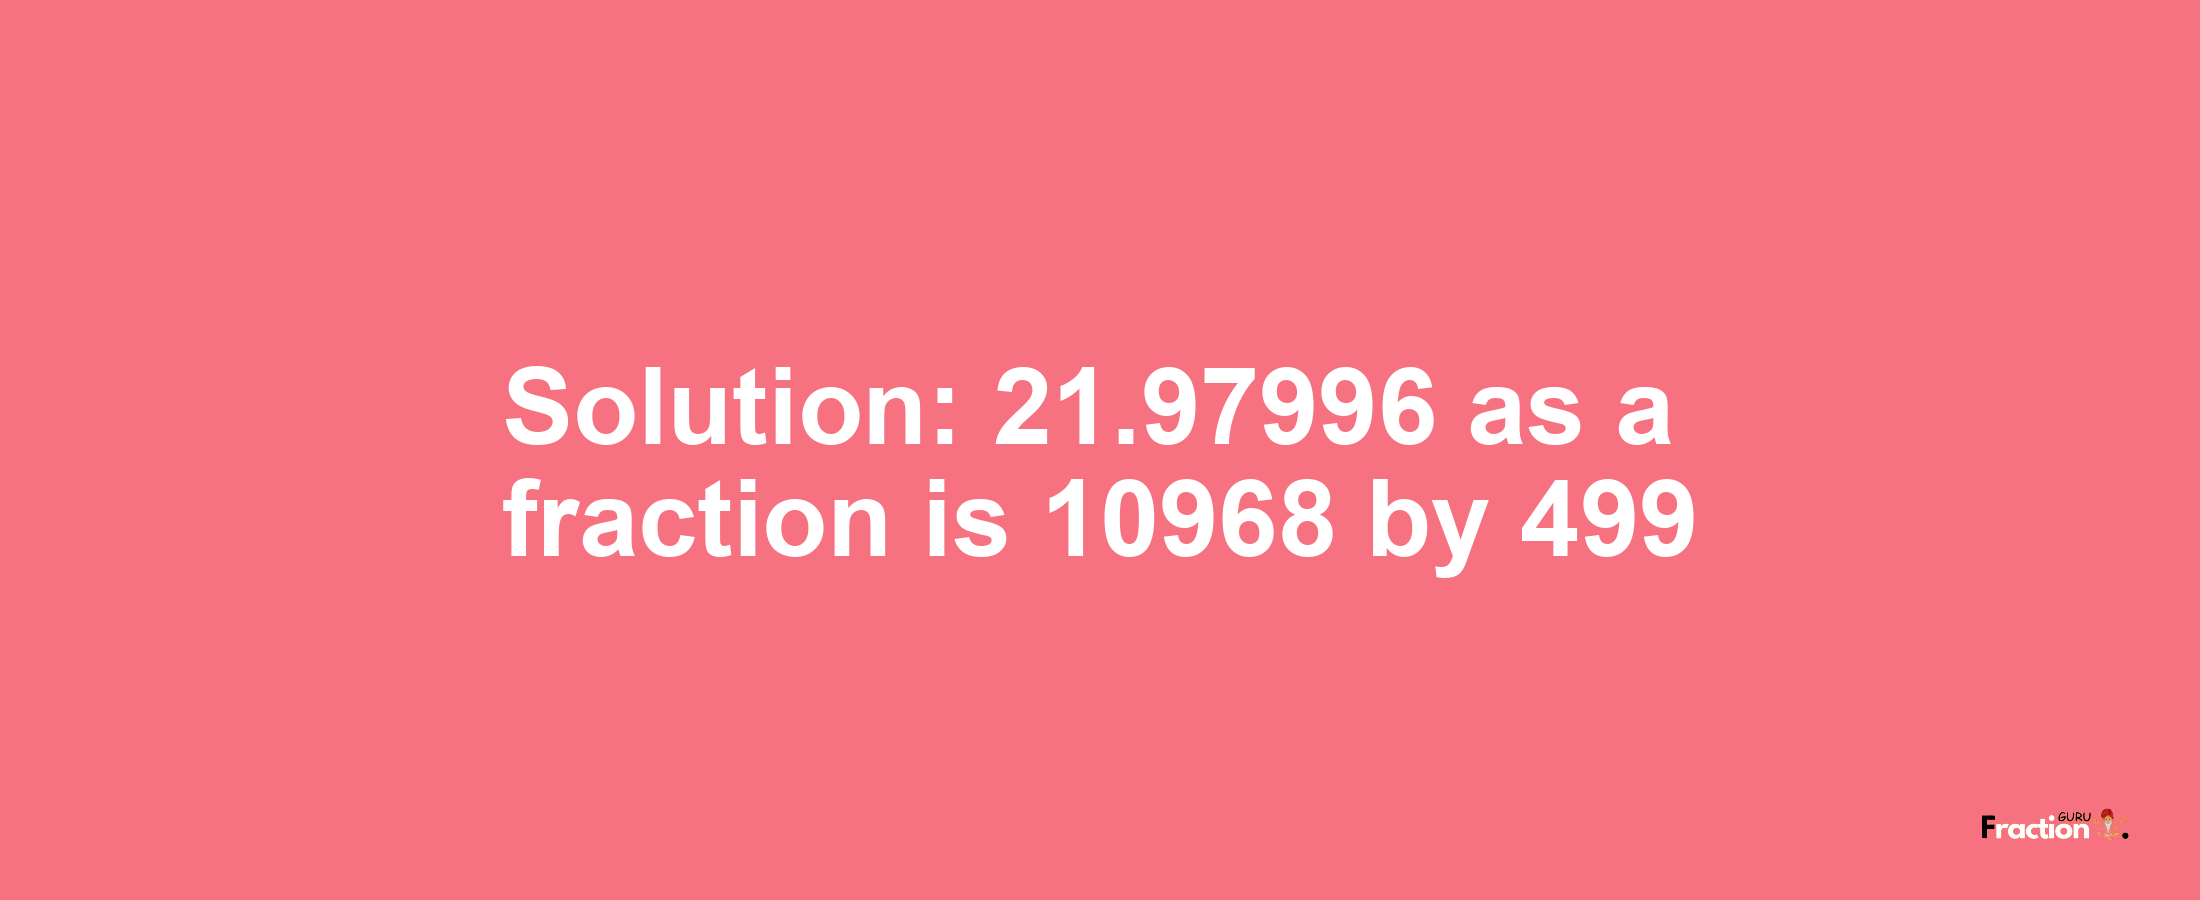 Solution:21.97996 as a fraction is 10968/499